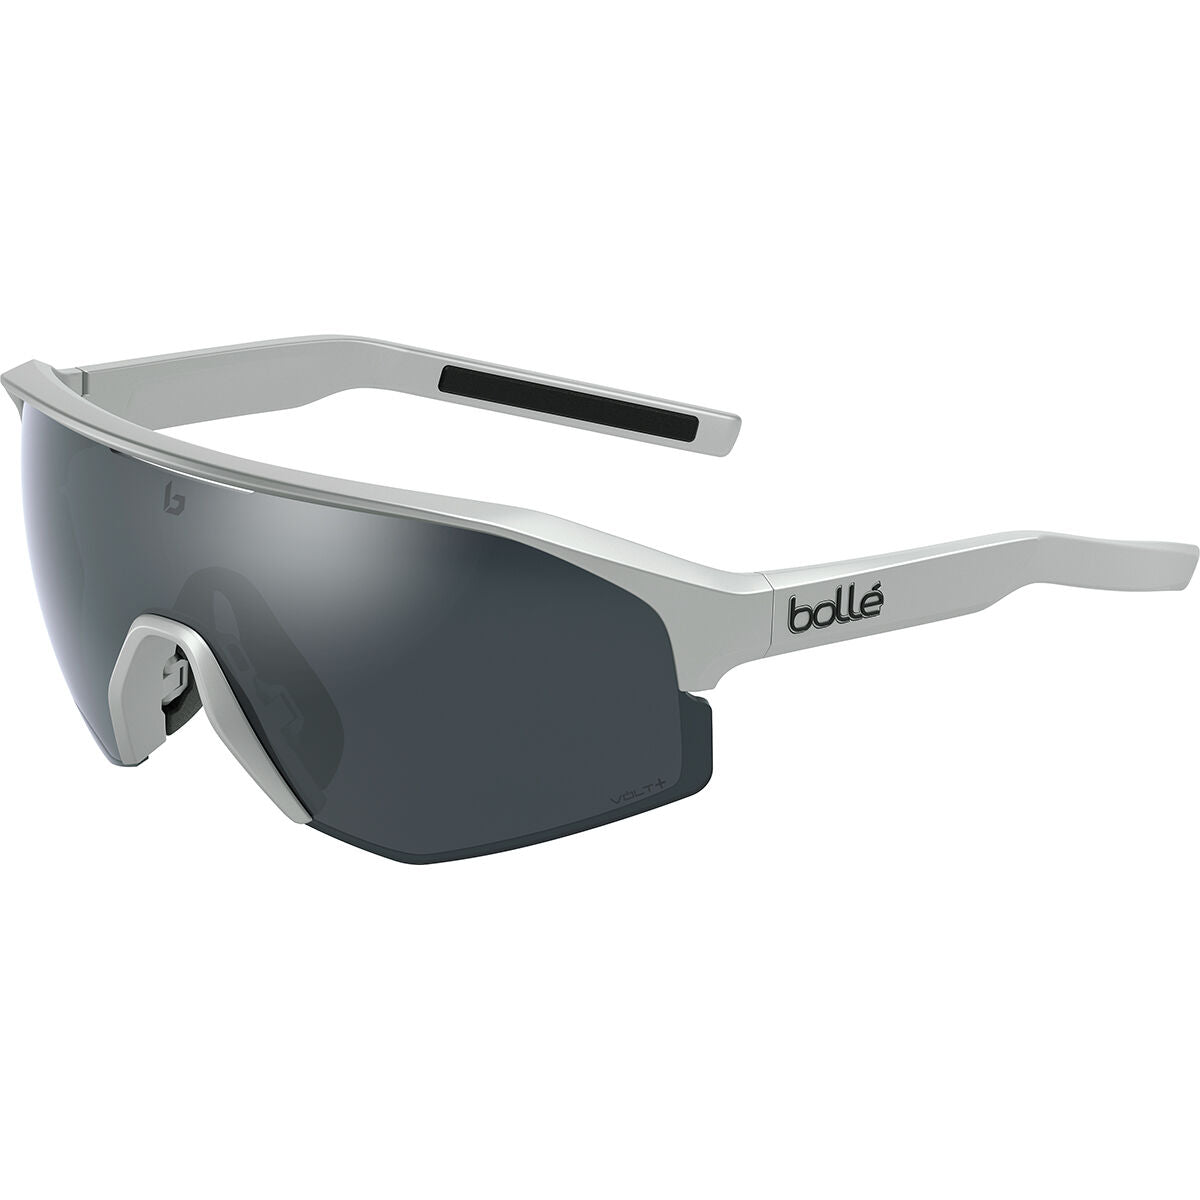 Bolle Lightshifter Xl Sunglasses  Silver Matte One Size